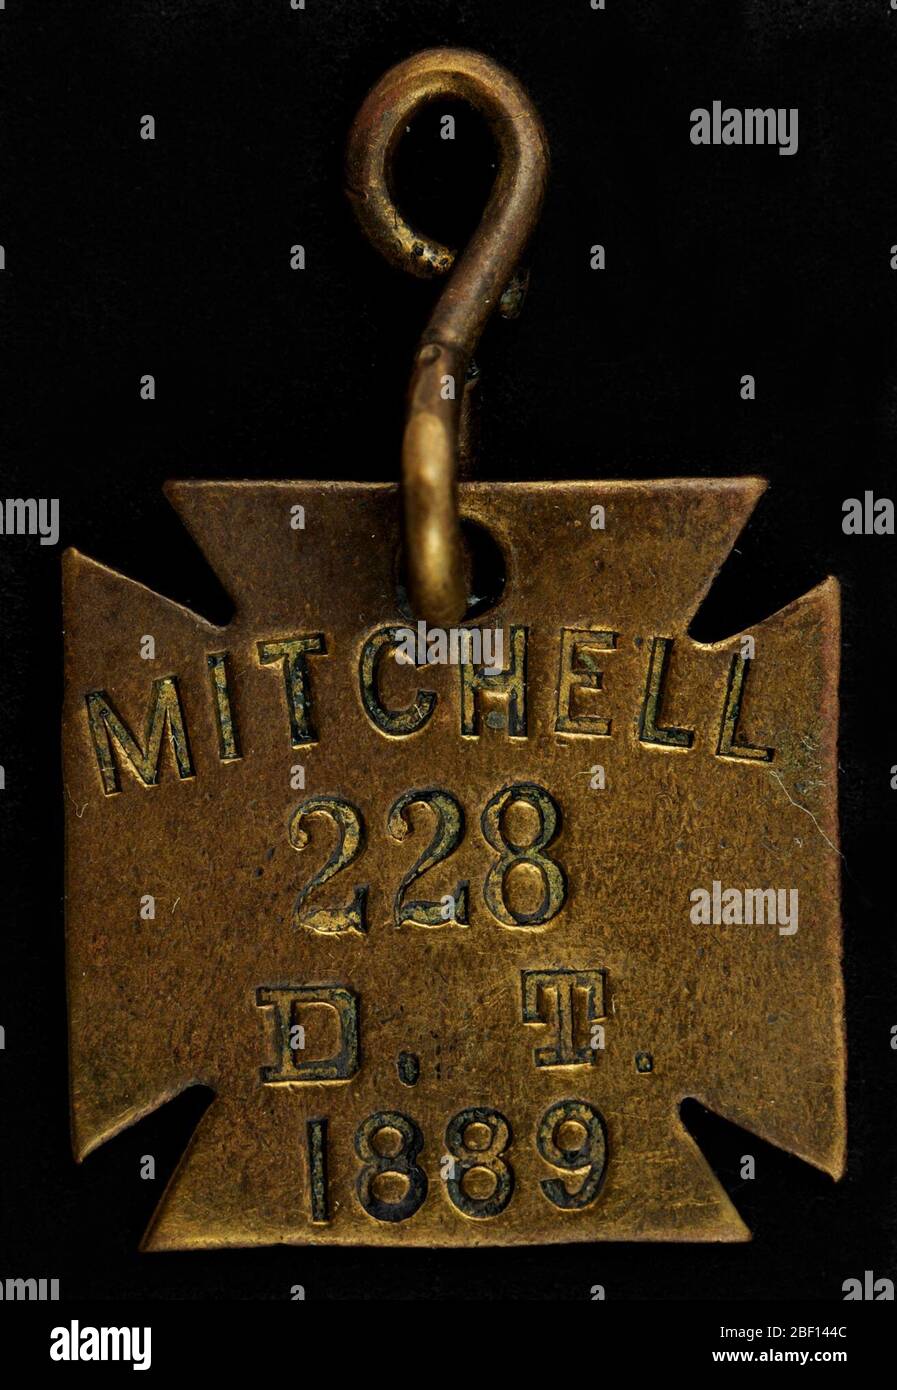 Mitchell Owney tag. Owney received this token while visiting the town of Mitchell, South Dakota. As the tag notes, in 1889, Mitchell was still part of the Dakota Territory (the territory became North and South Dakota late in the year, on November 2, 1889). Stock Photo